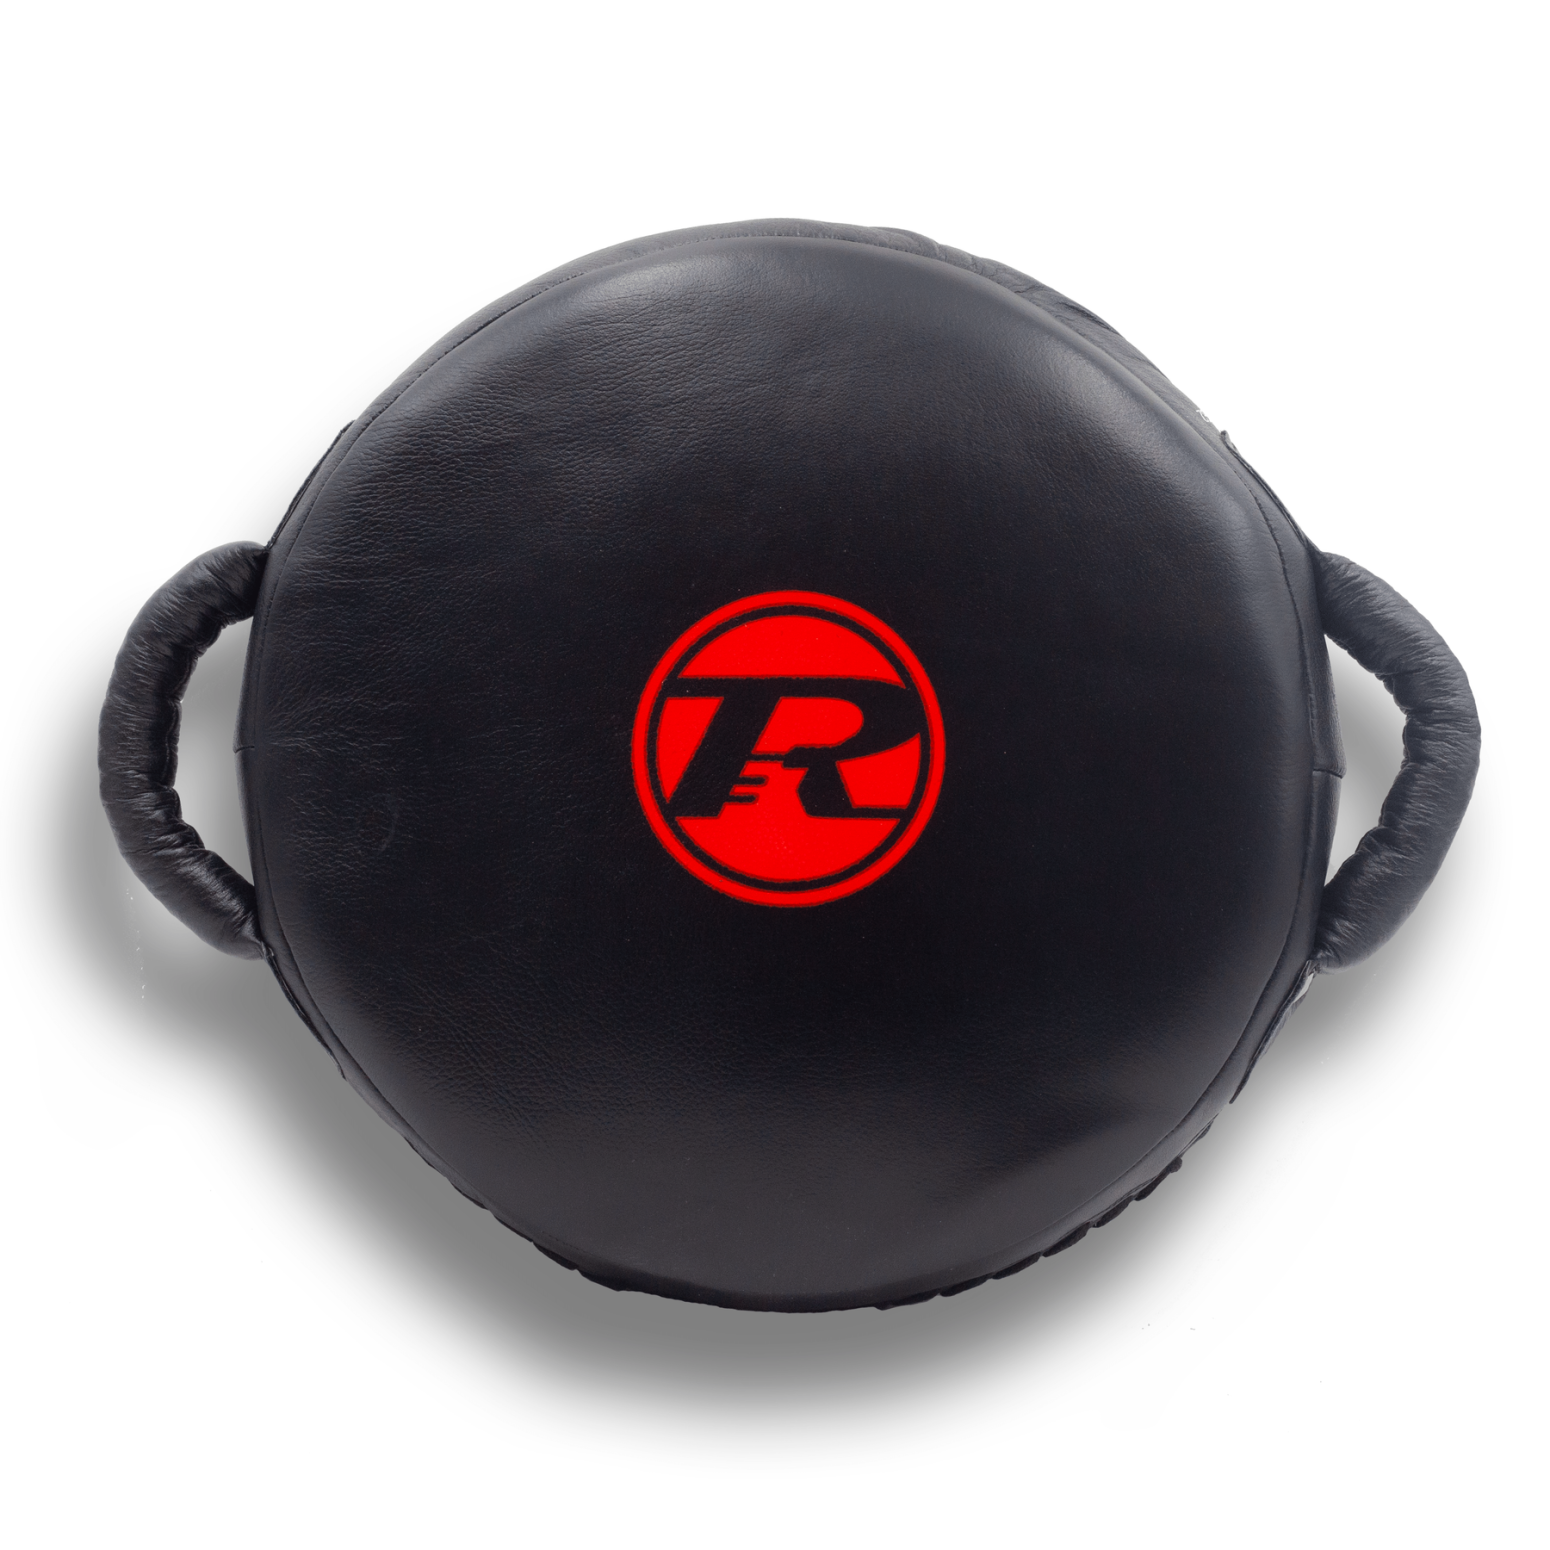 Ringside Boxing Protect G2 Leather Circular Punch Pad - Black - Click Image to Close